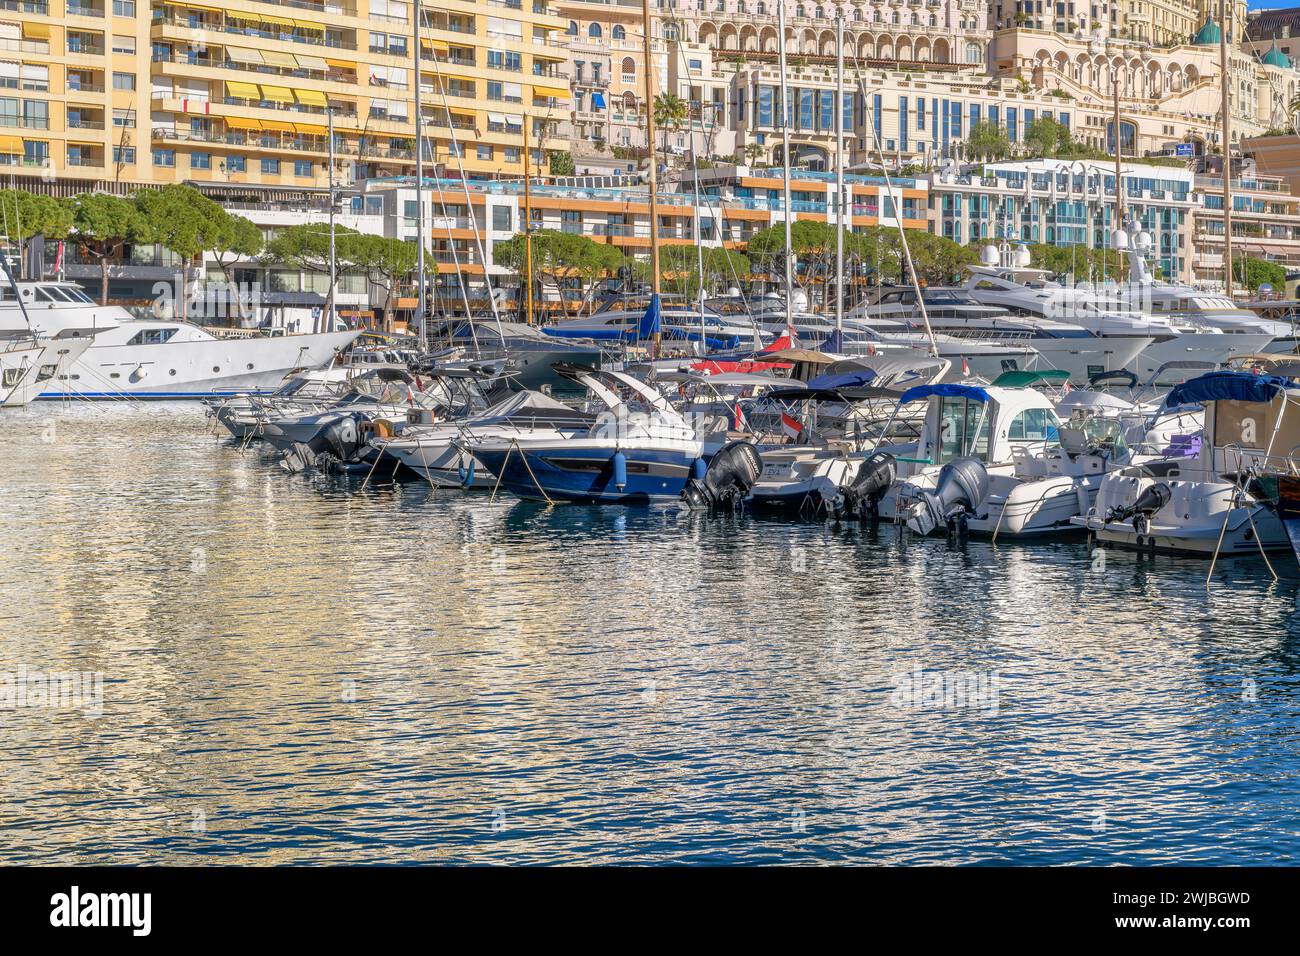 Port Hercule marina, Monte Carlo in Monaco. From here the city rises into the hills behind. Interwoven with winding roads and smart homes. Stock Photo